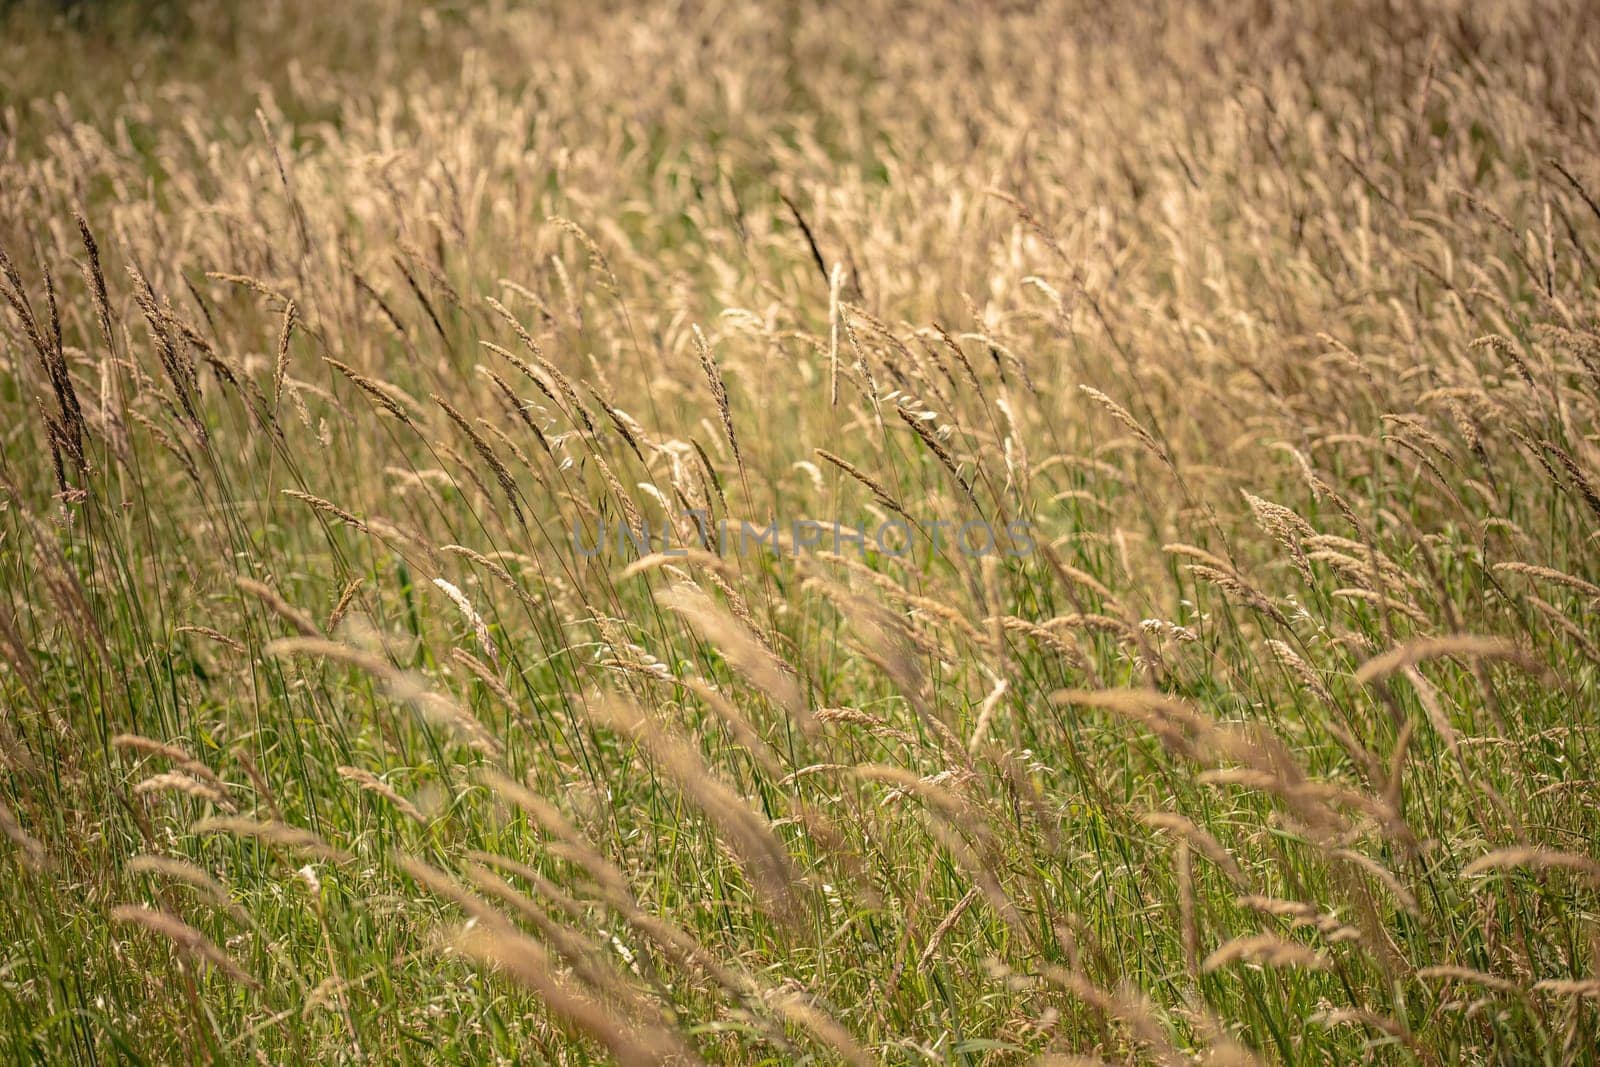 A field filled with tall grass swaying in the wind, creating a dense and lush landscape.